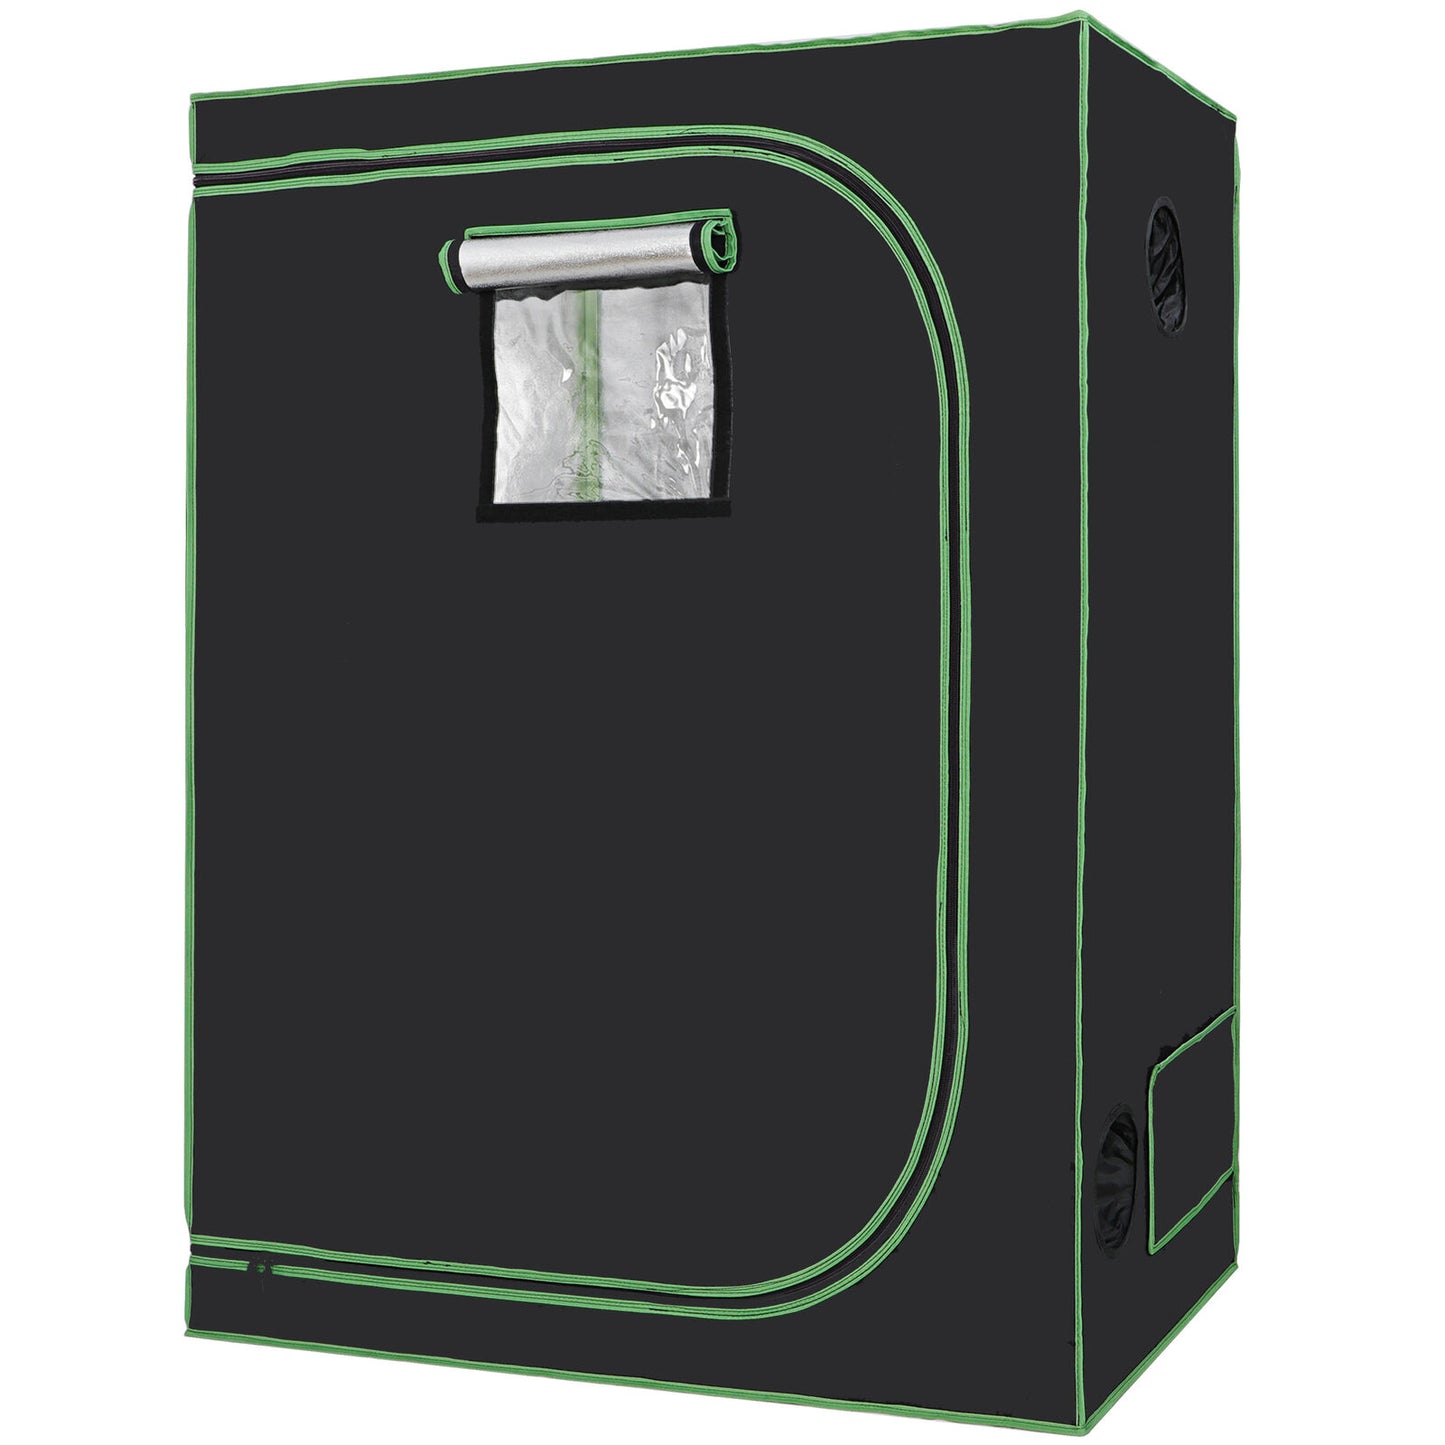 24""x48""x60" Indoor Hydroponic Grow Tent with Observation Window and Floor Tray